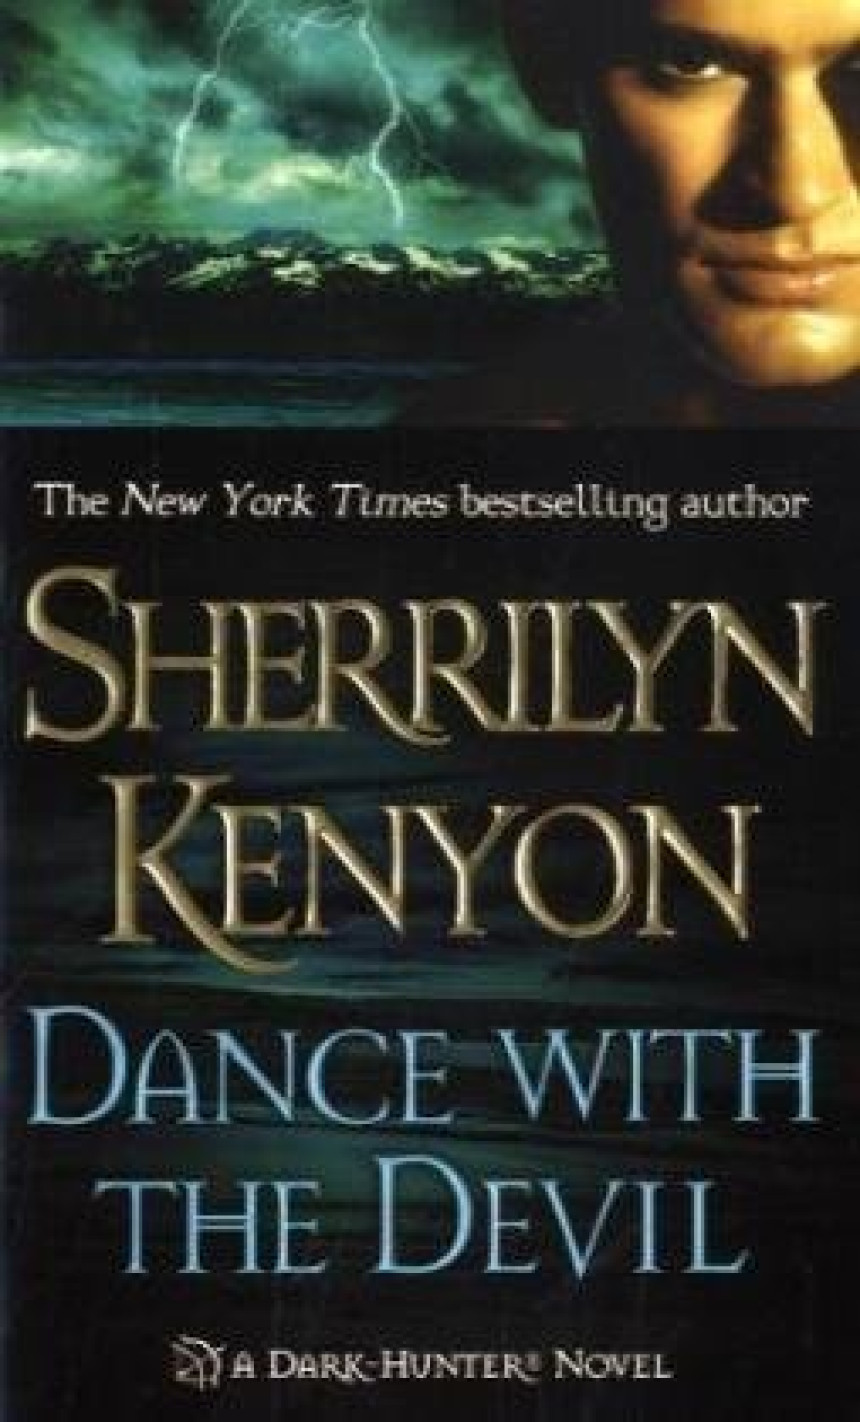 Free Download Dark-Hunter #3 Dance with the Devil by Sherrilyn Kenyon